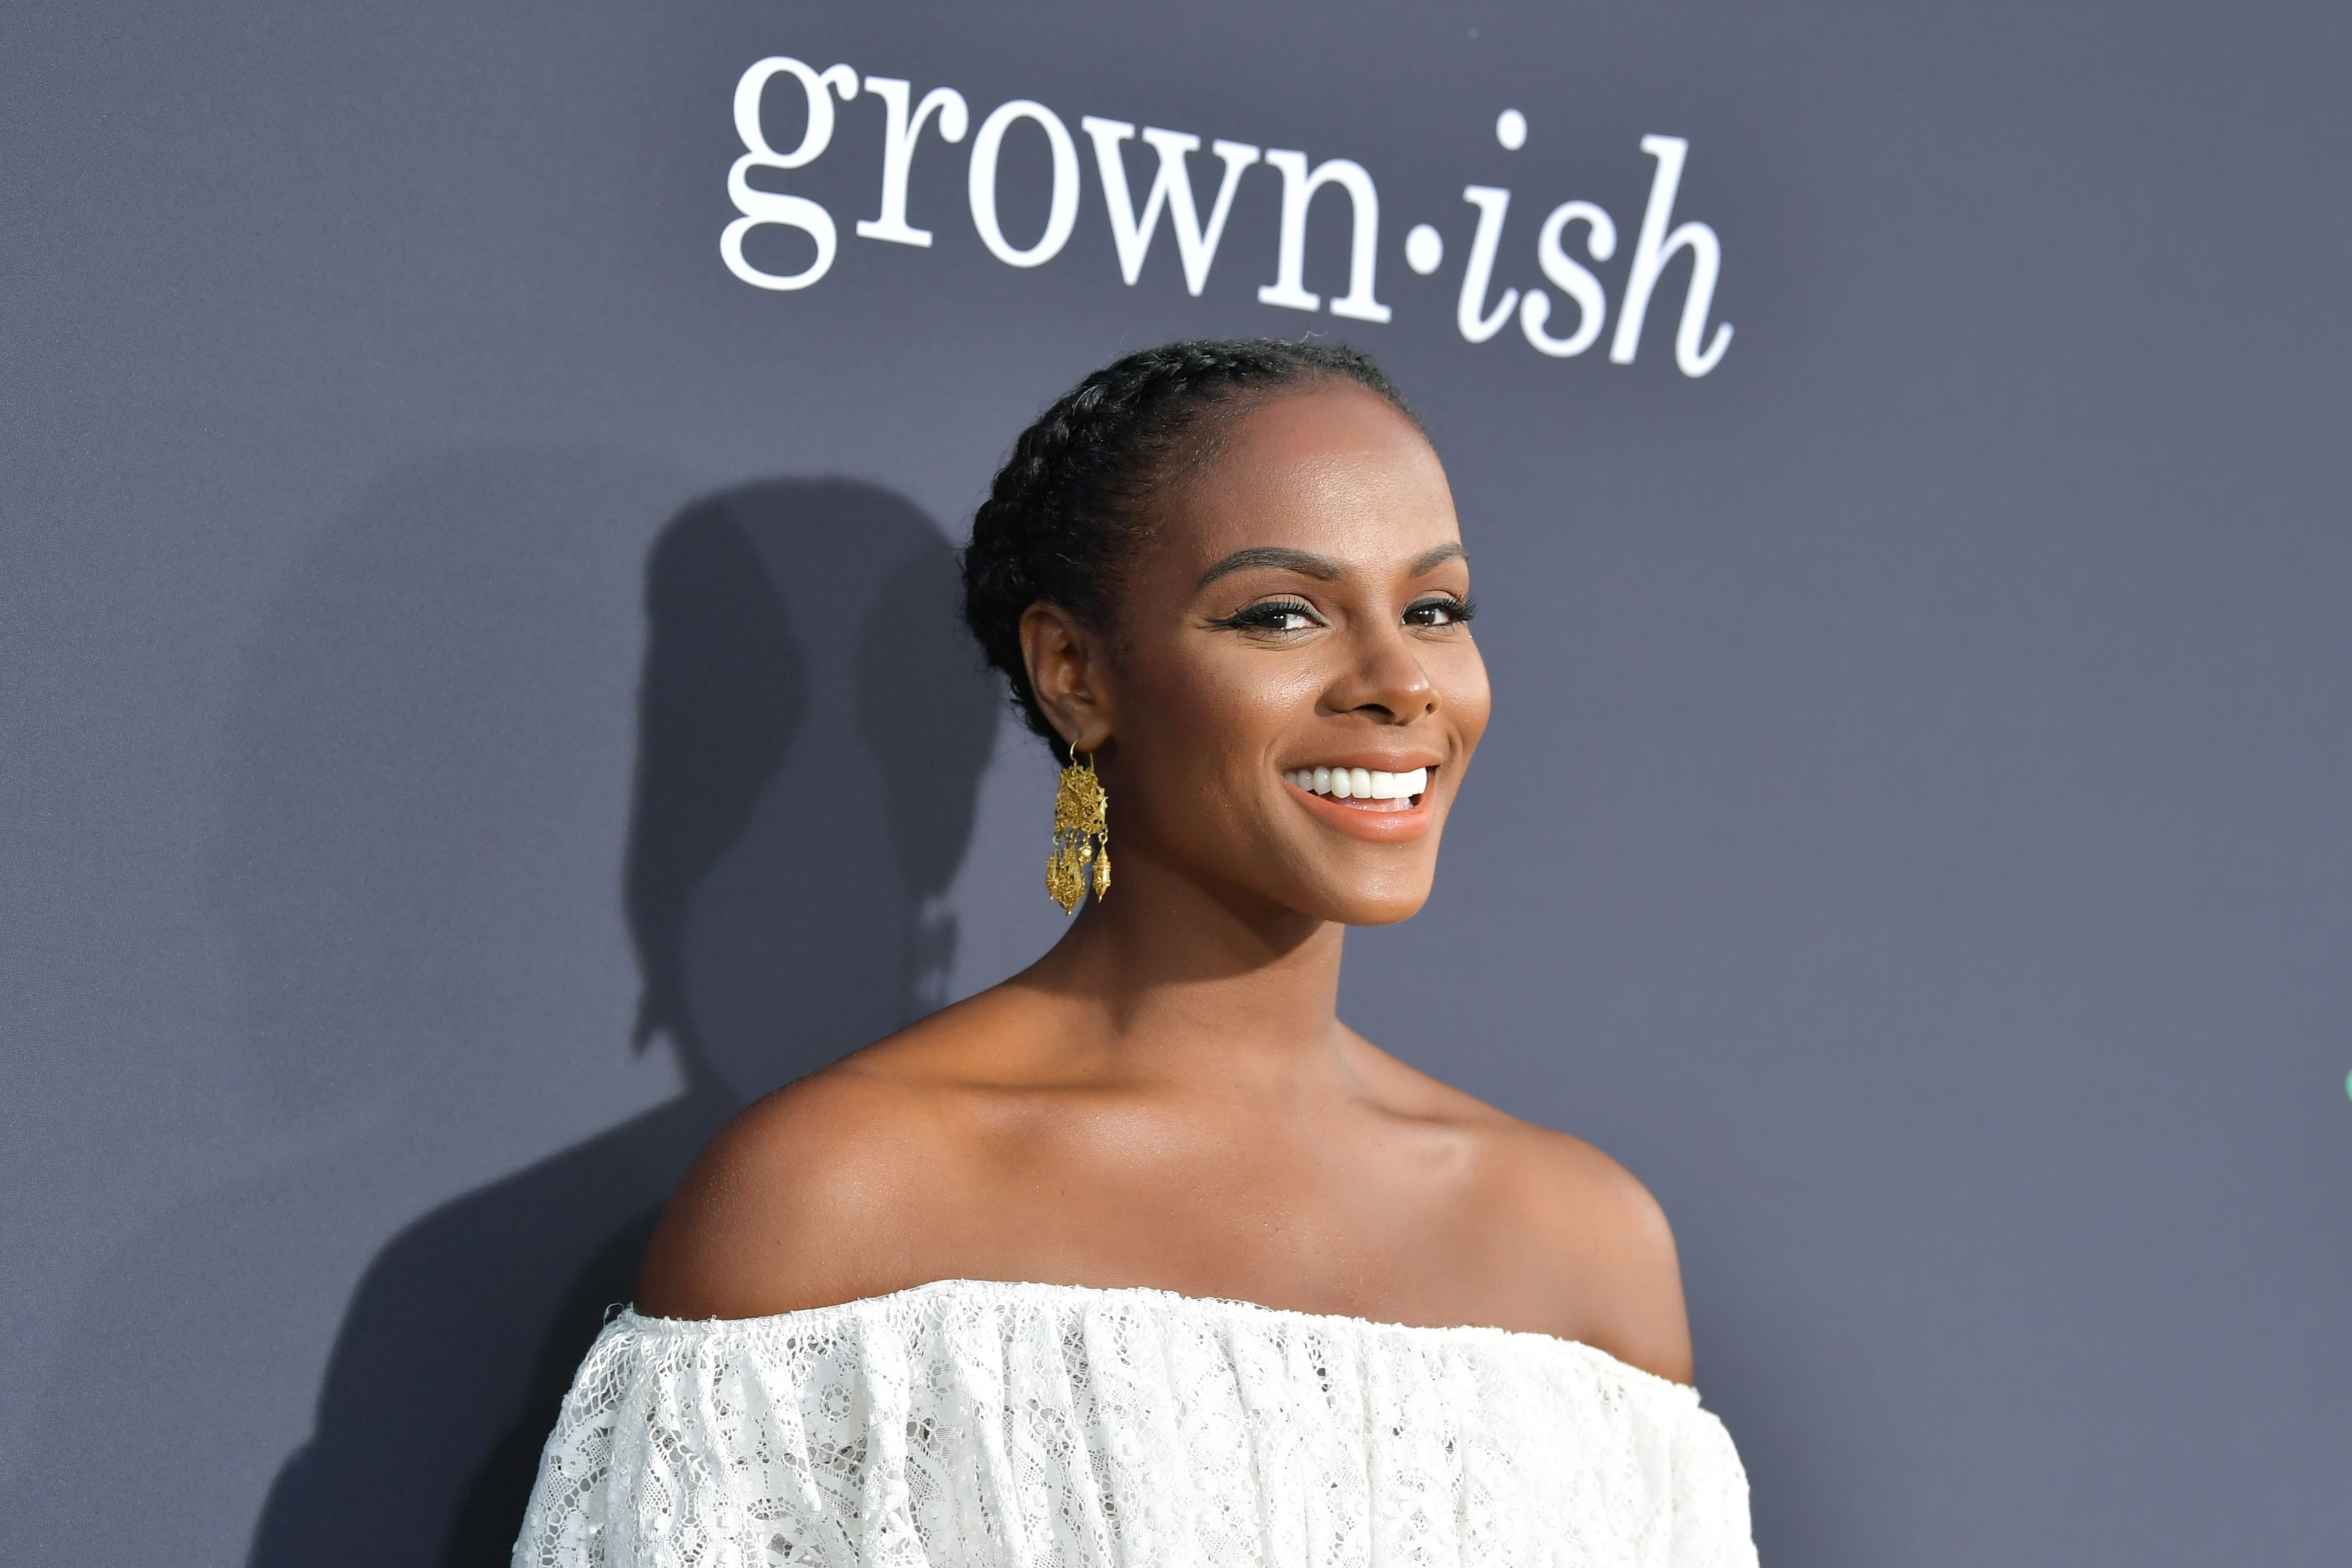 Tika Sumpter at PopSugar X ABC's "Embrace Your Ish" event at Goya Studios on September 17, 2019. | Photo: Getty Images